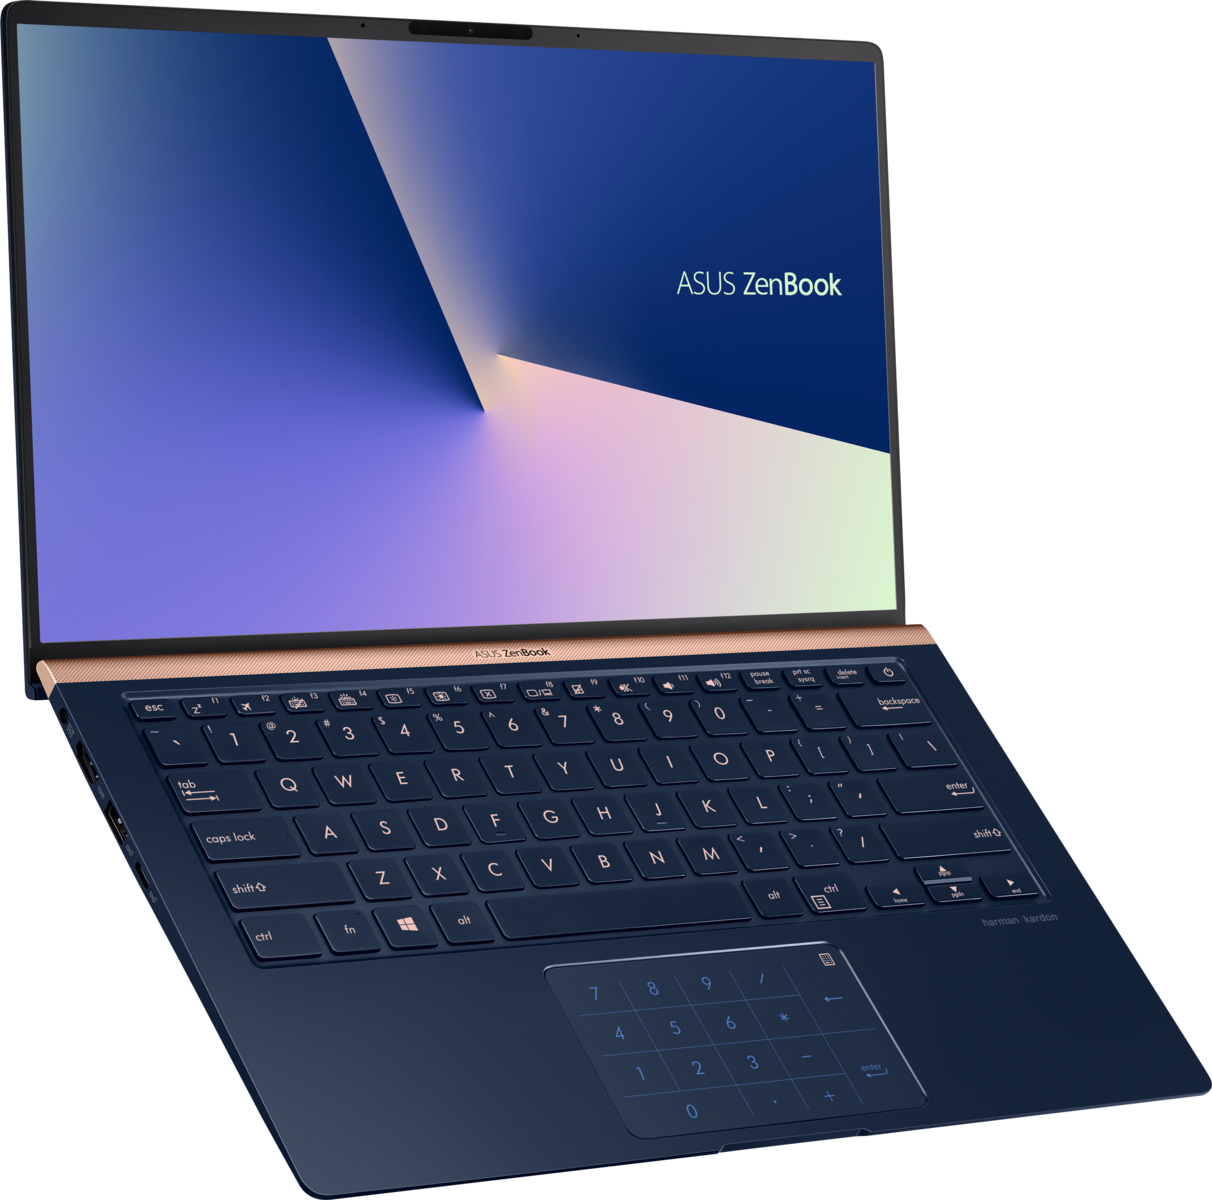 Asus refreshes its ZenBook lineup with slimmer NanoEdge bezels and GTX